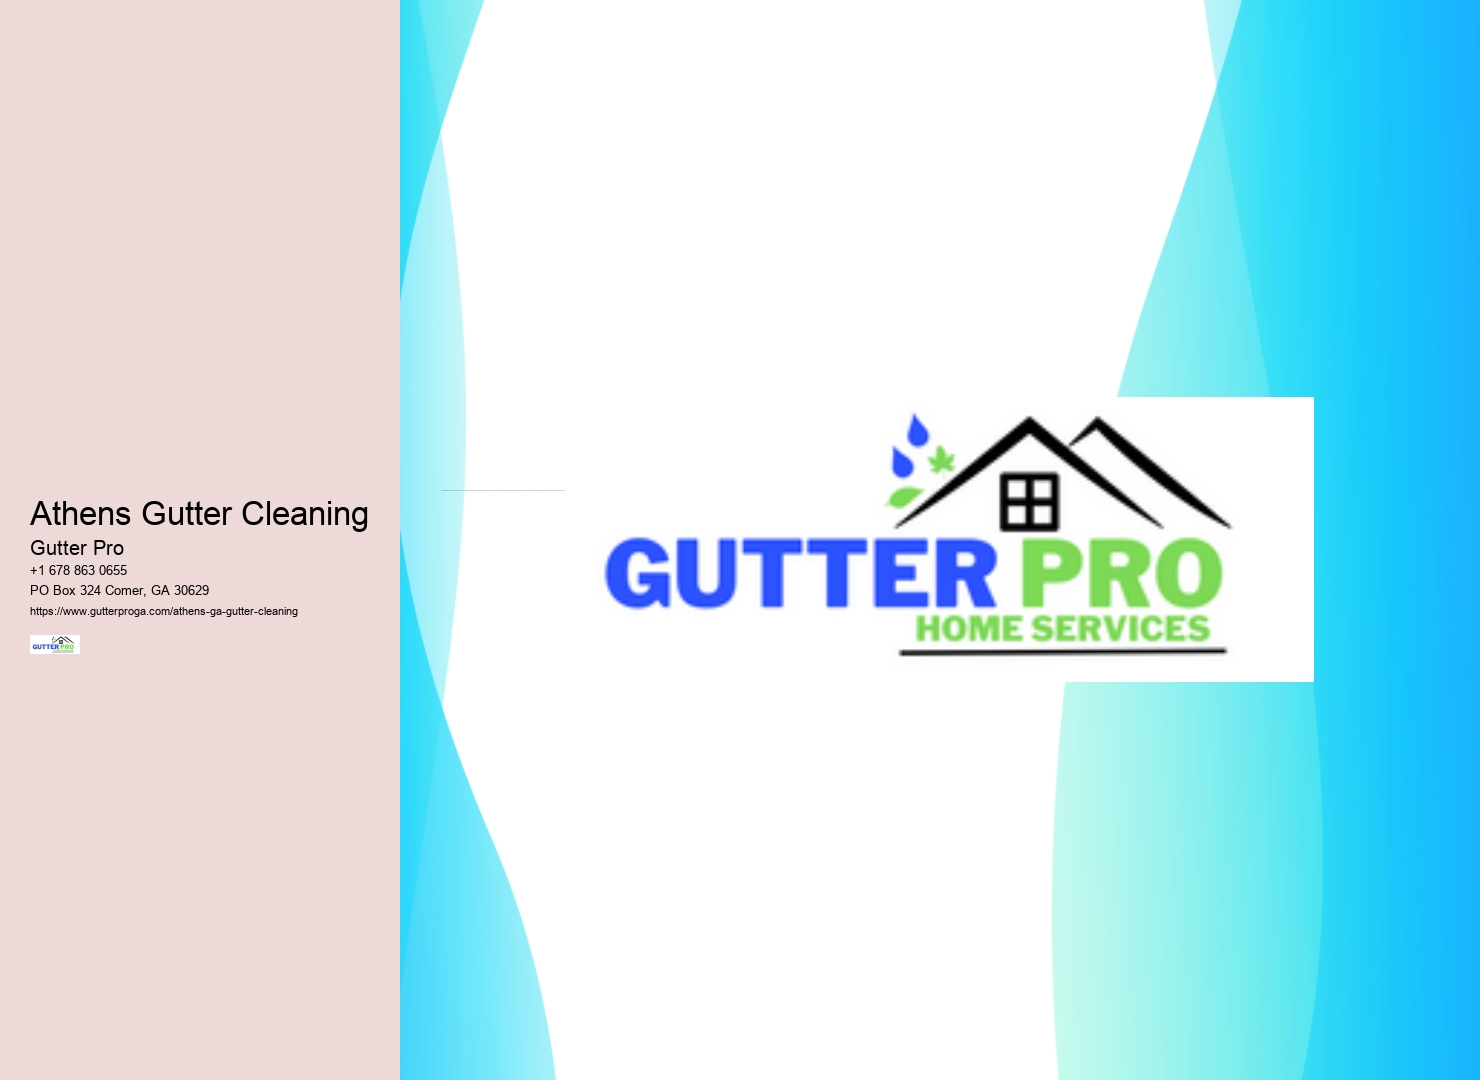 Athens Gutter Cleaning